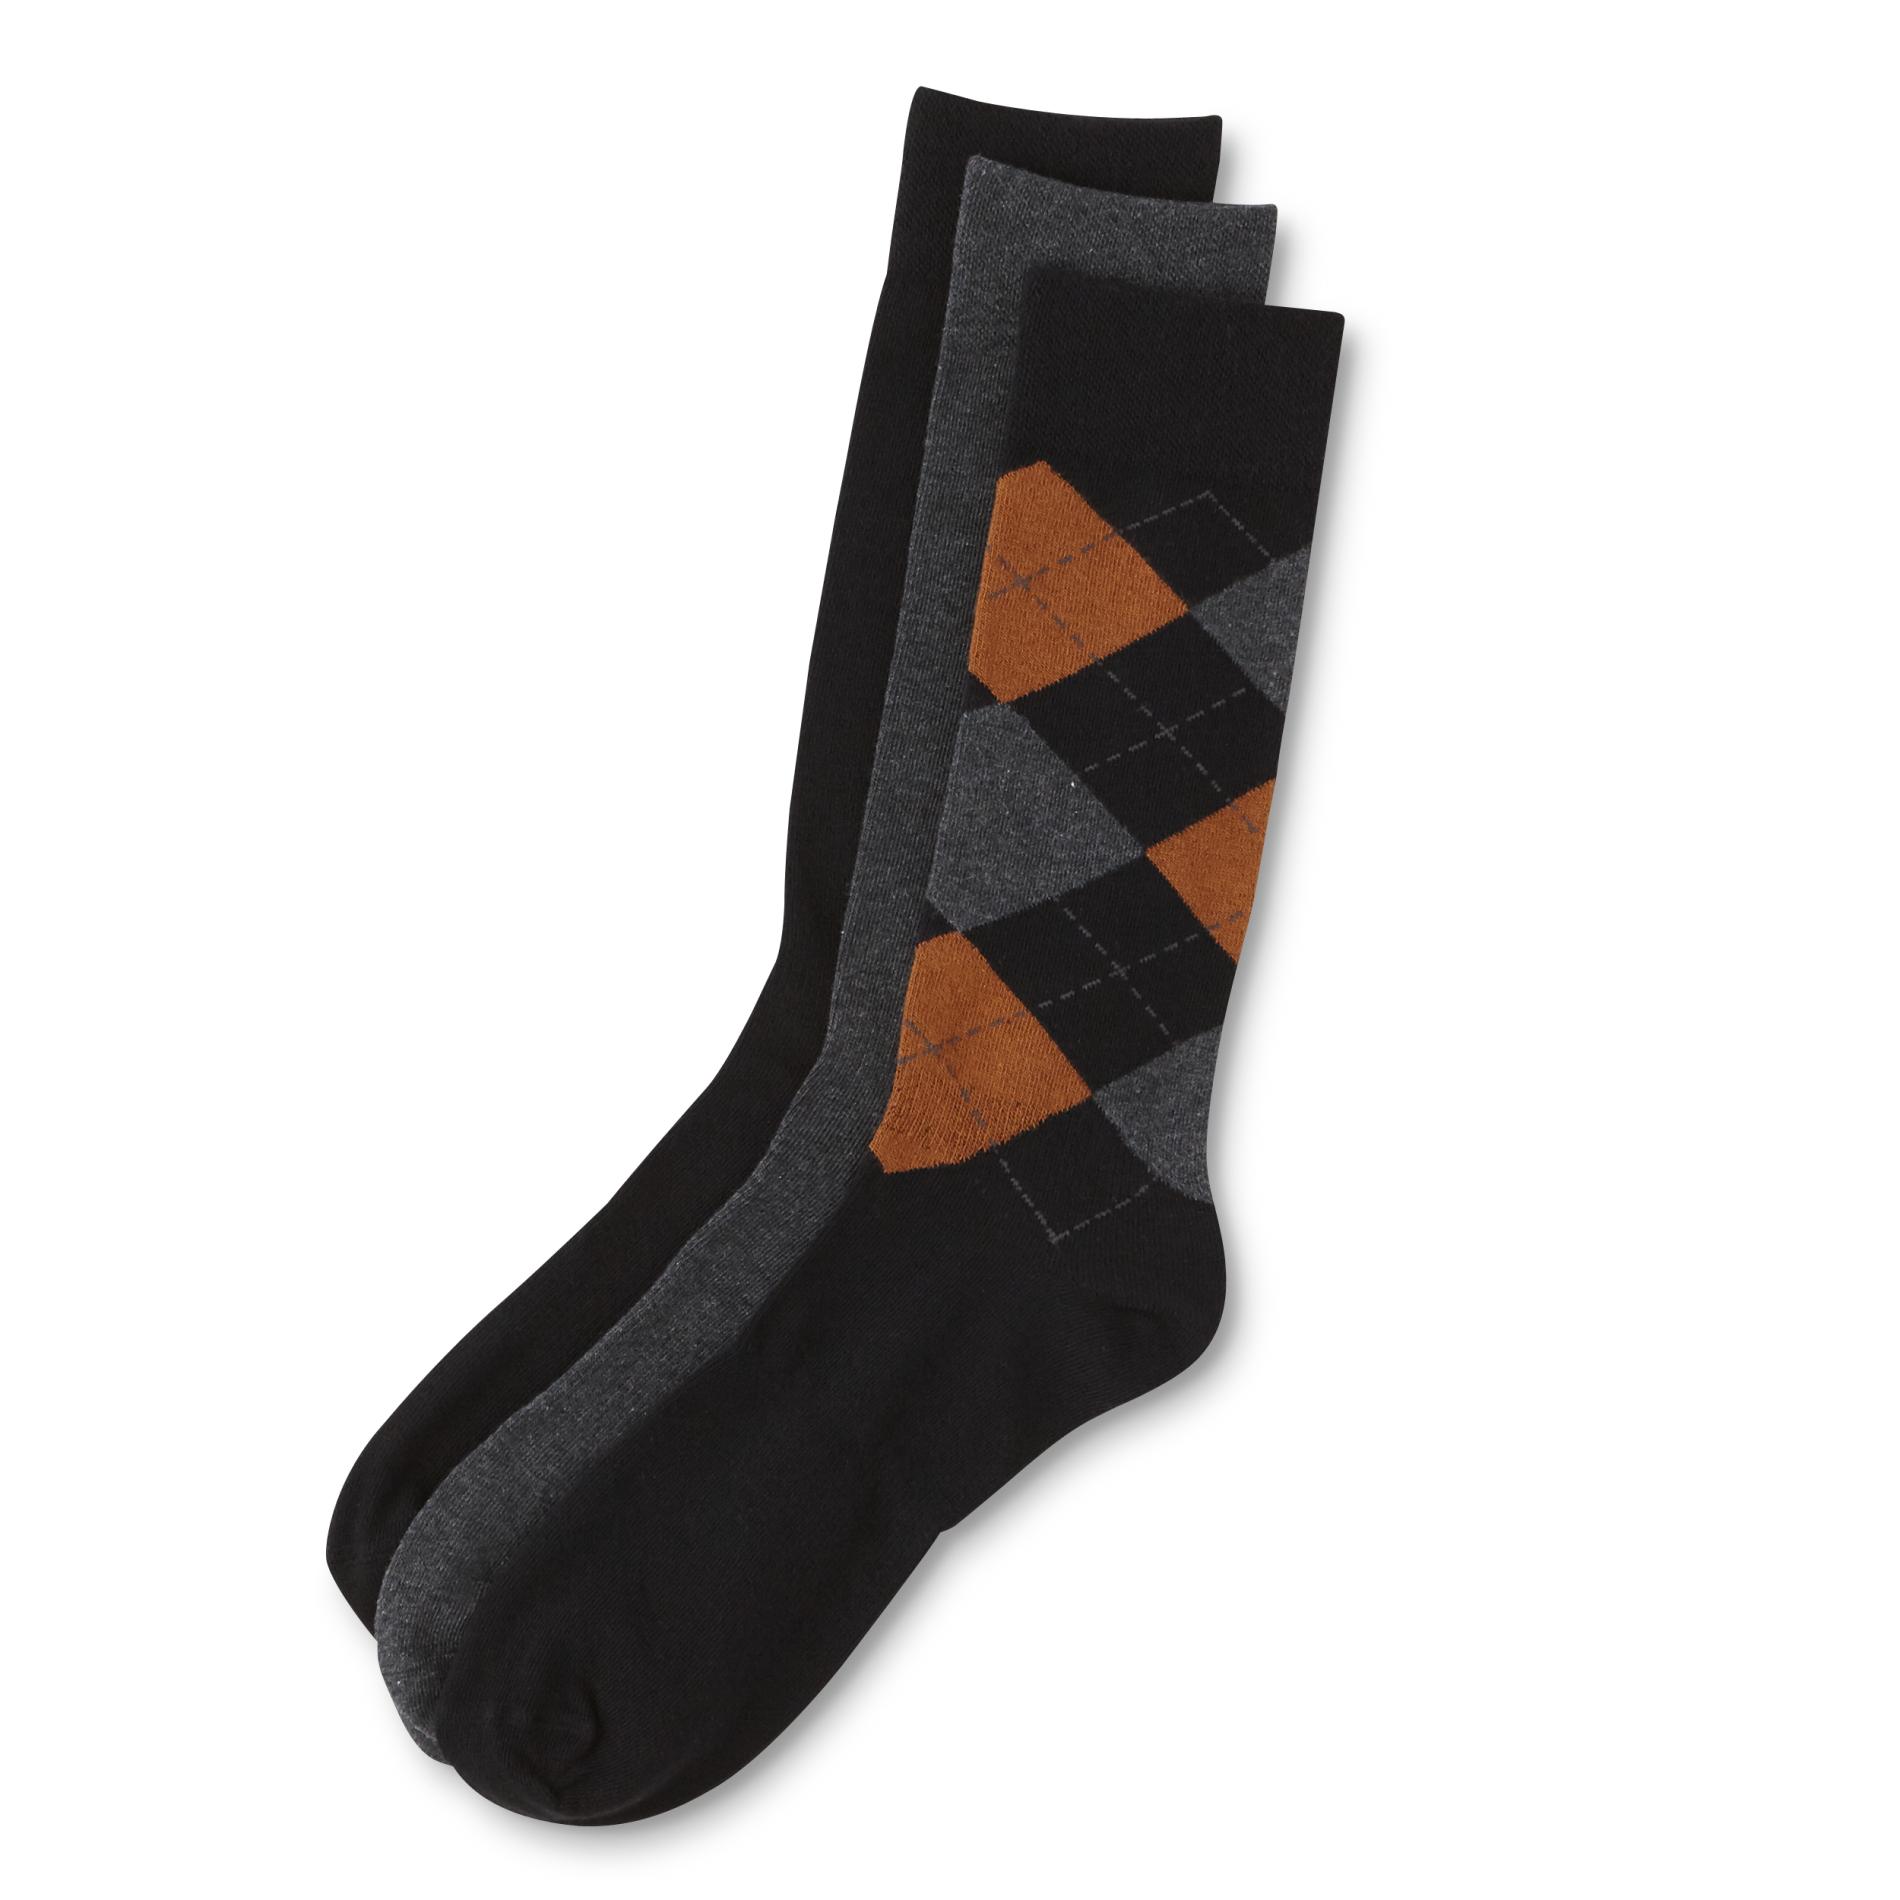 Simply Styled Men's 3-Pairs Support Fit Mid-Calf Crew Socks - Solid & Argyle